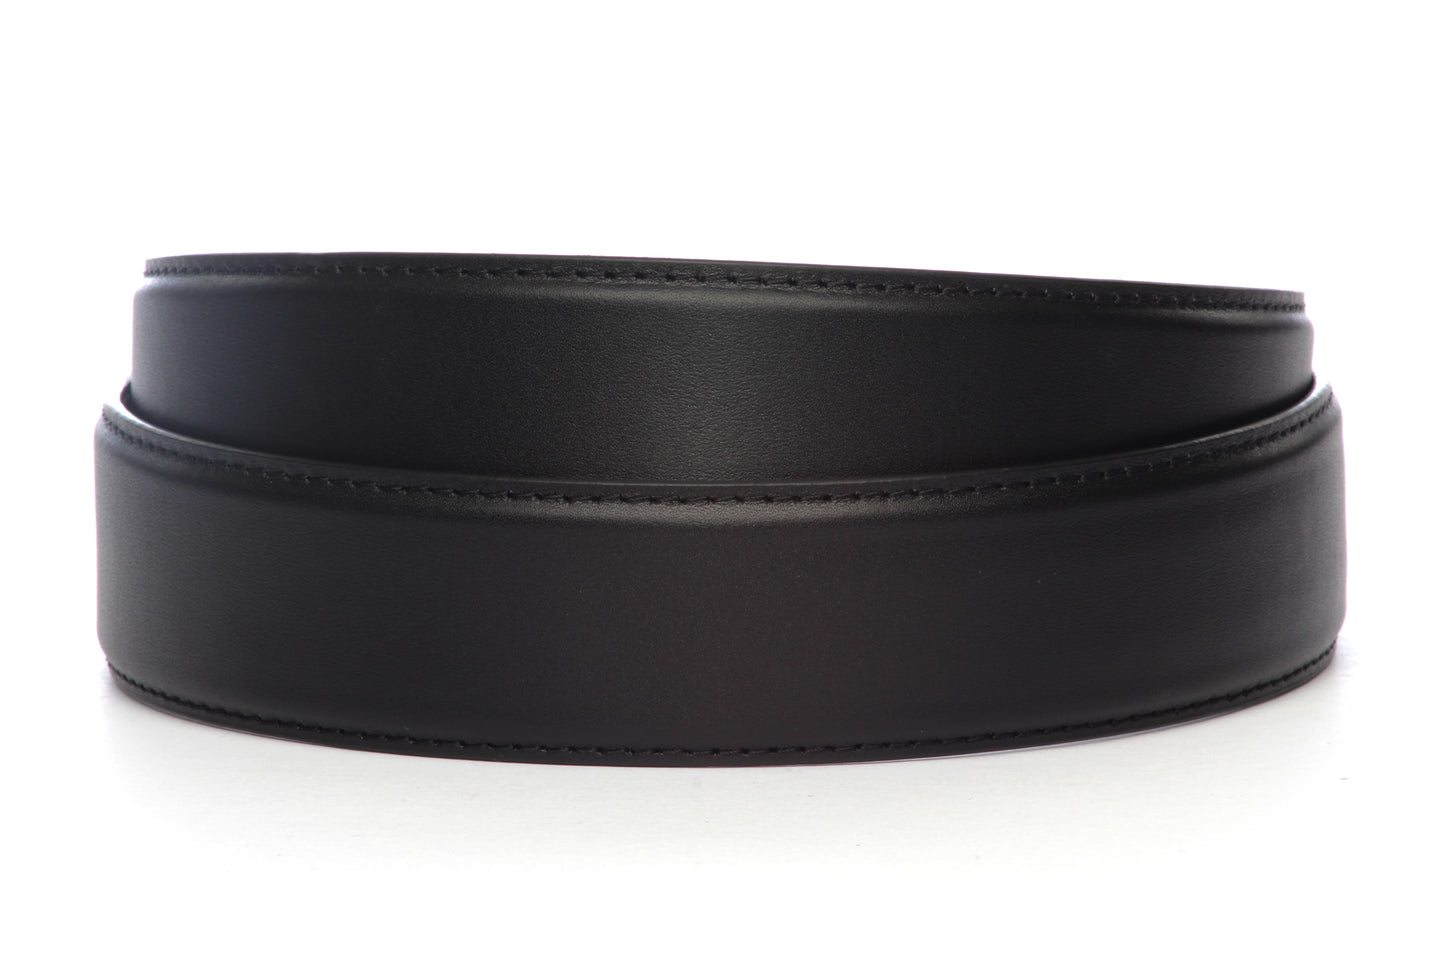 Men's leather belt strap in black, 1.5 inches wide, formal look